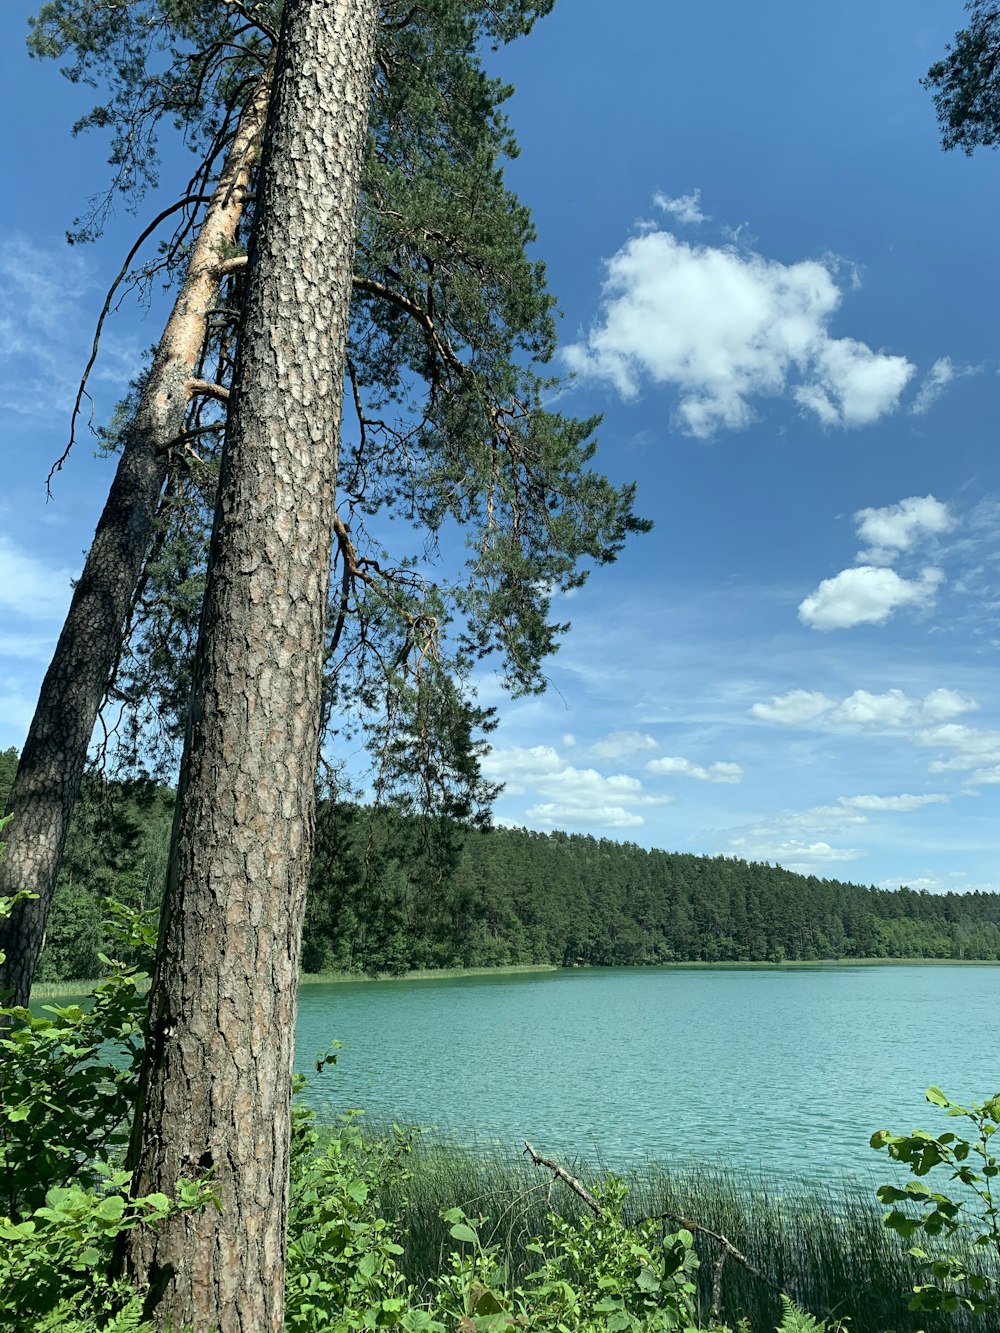 green trees near lake under blue sky during daytime